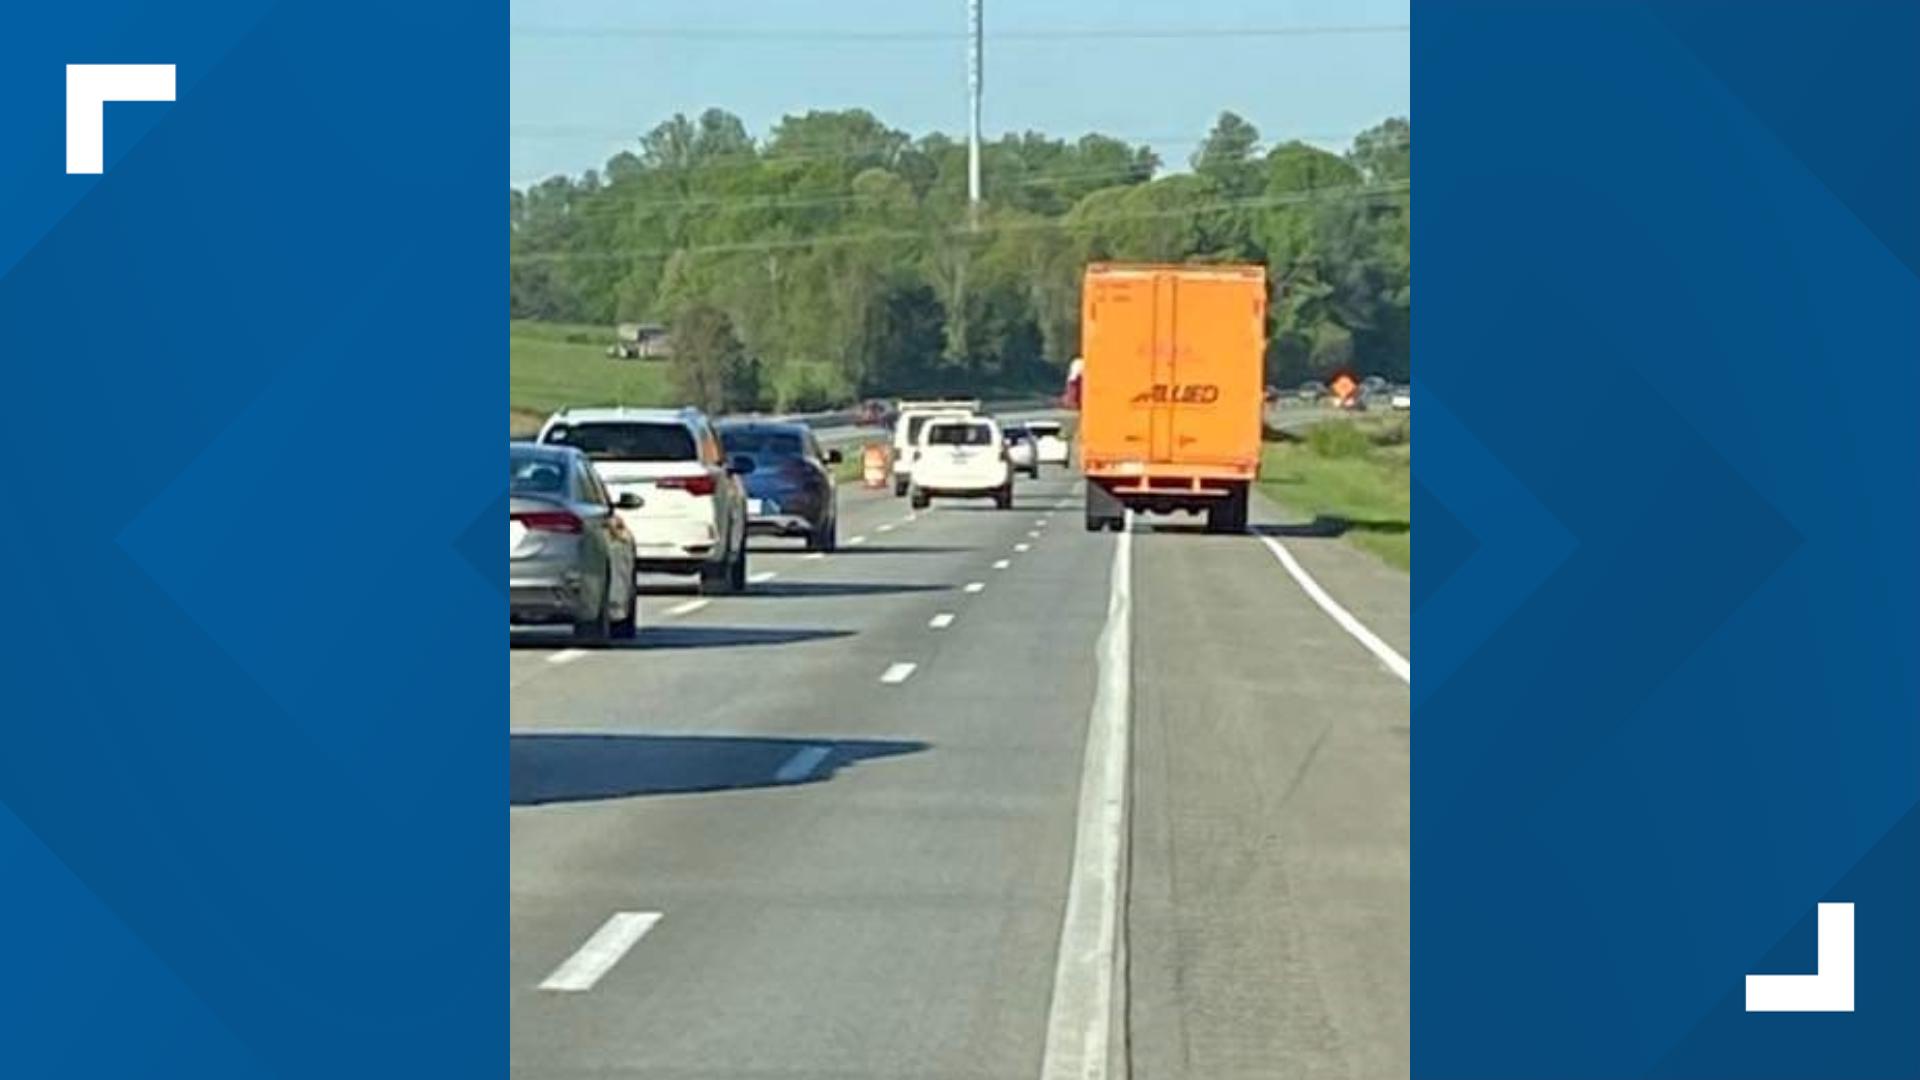 A viewer reached out to WFMY News 2 about the confusing road markings. Here's what NCDOT said.